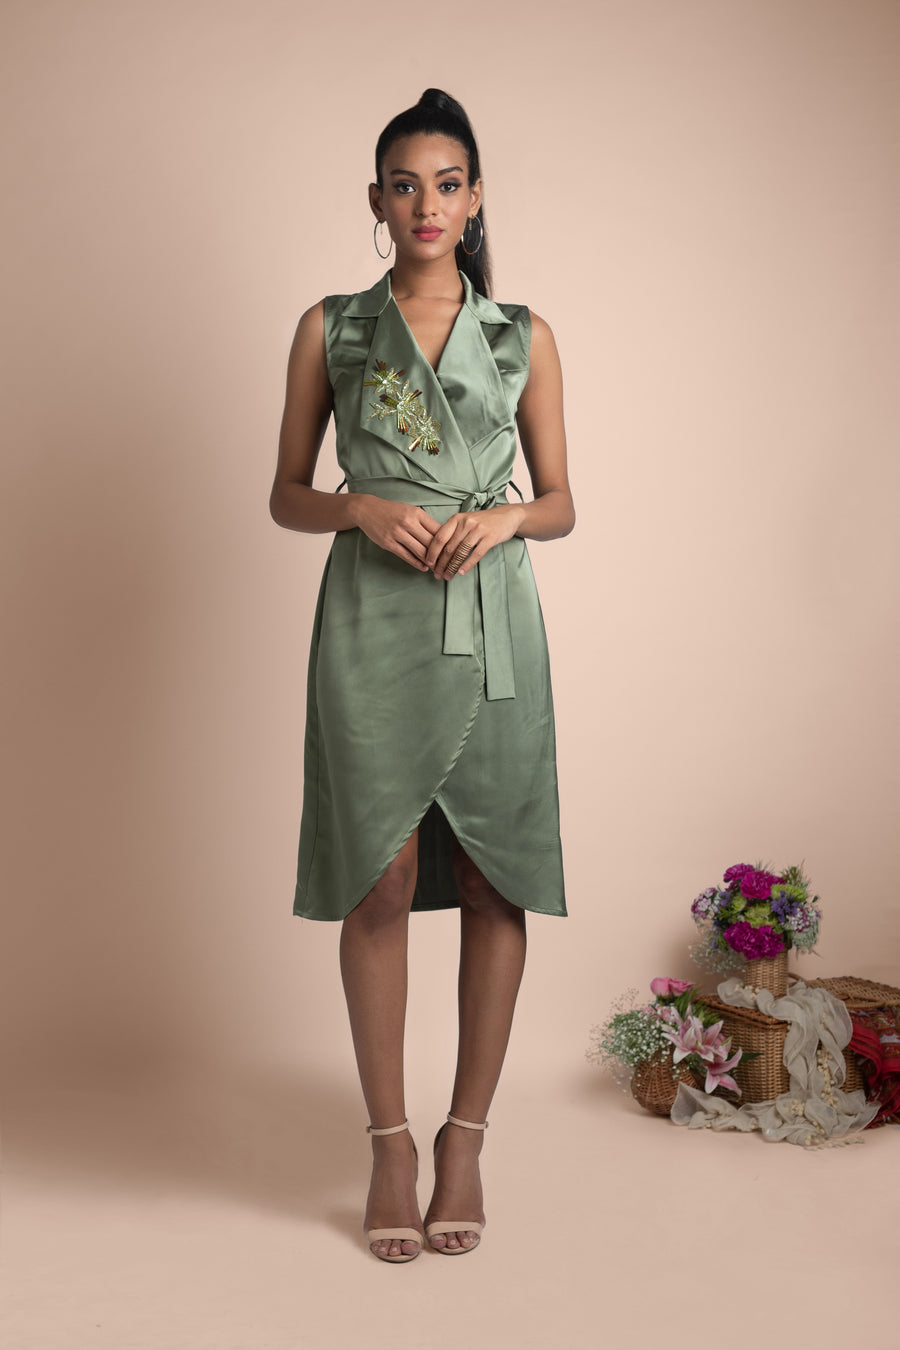 Mehak Murpana | Trench Dress | | Stylish formal and party wear.